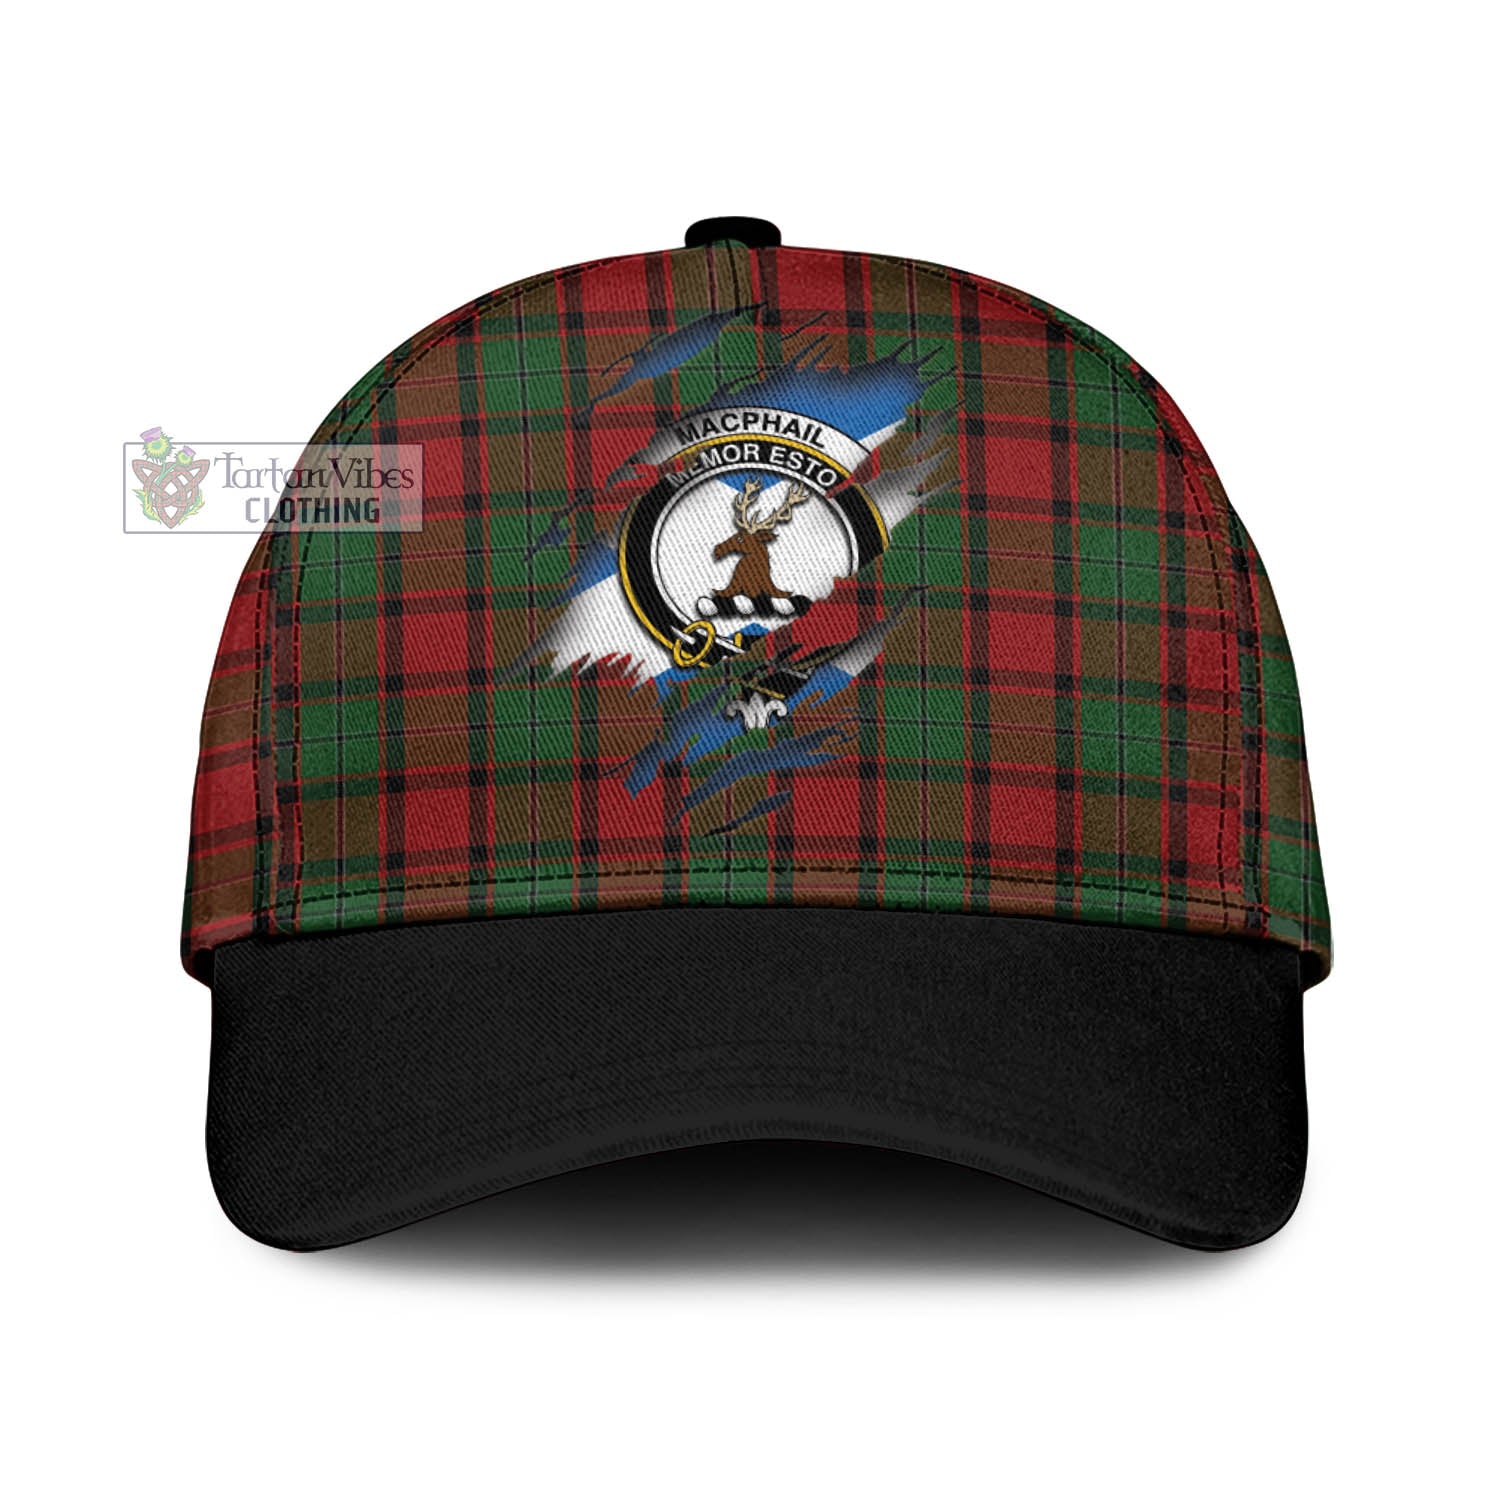 Tartan Vibes Clothing MacPhail Tartan Classic Cap with Family Crest In Me Style